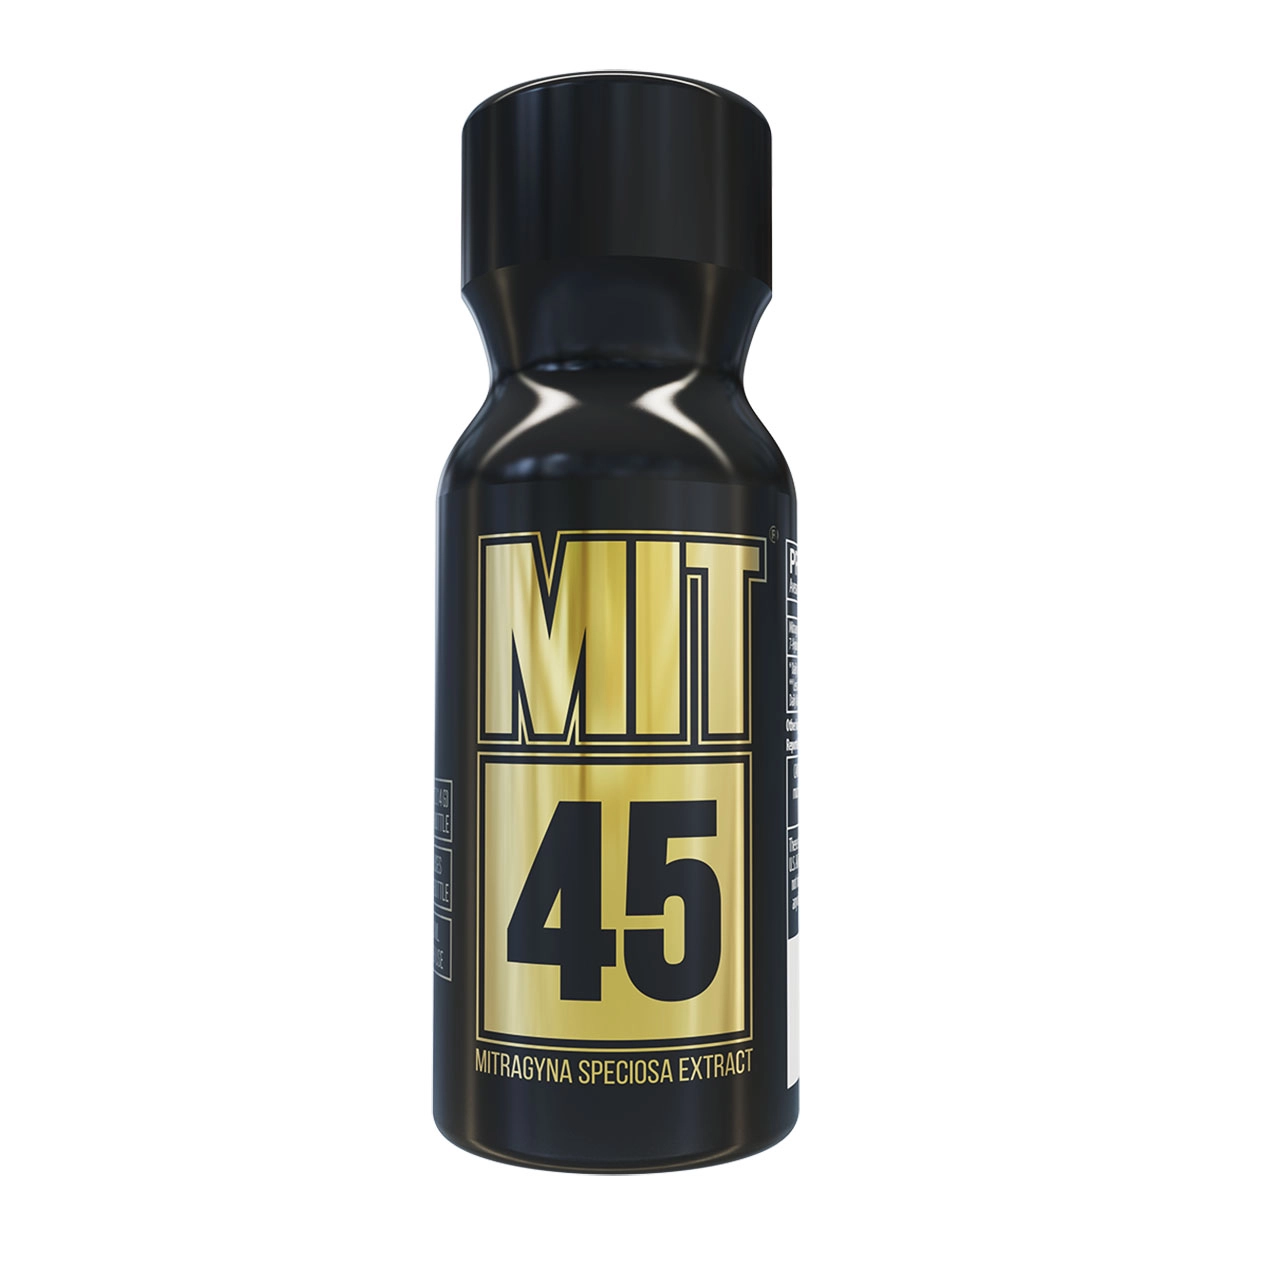 Bottle of a shot of MIT 45 kratom product